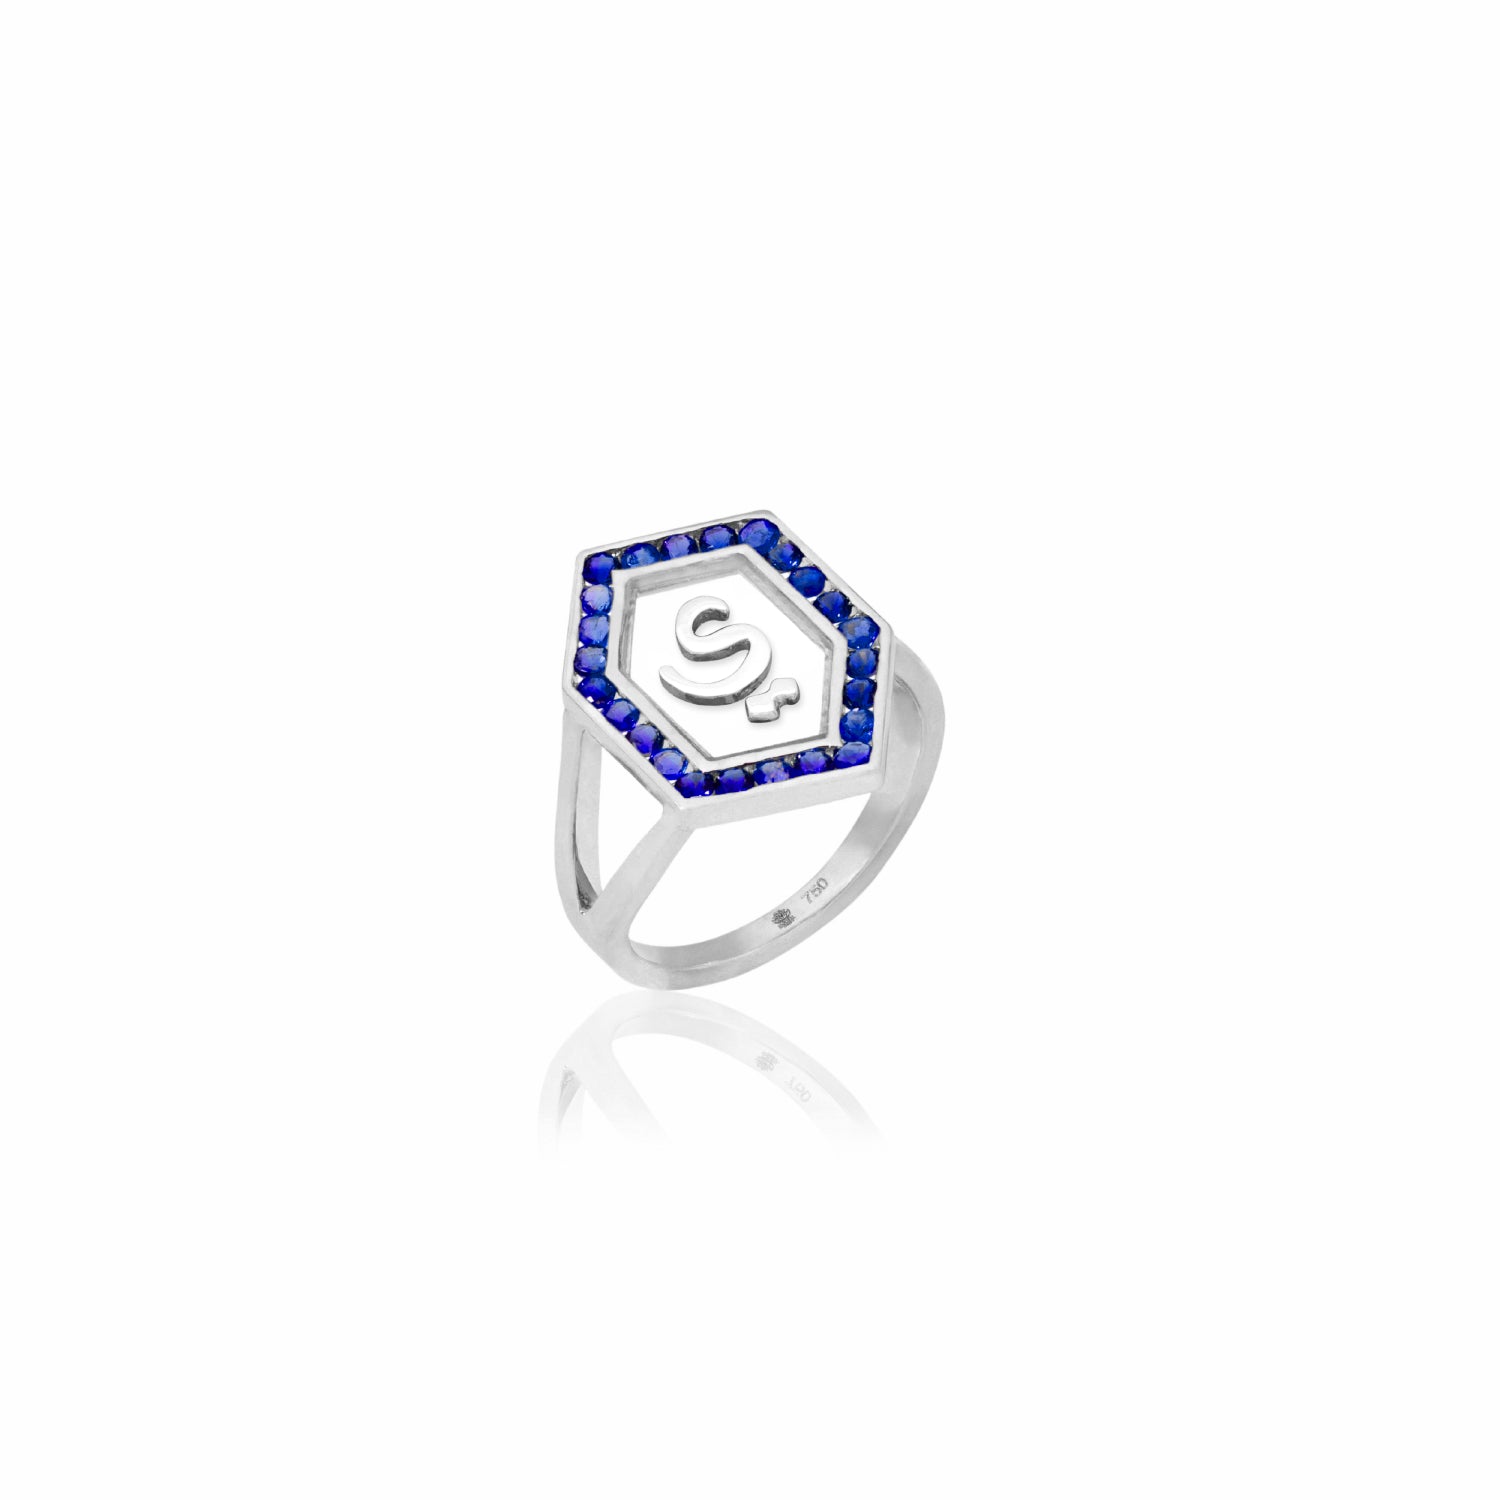 Qamoos 1.0 Letter ي Sapphire Ring in White Gold